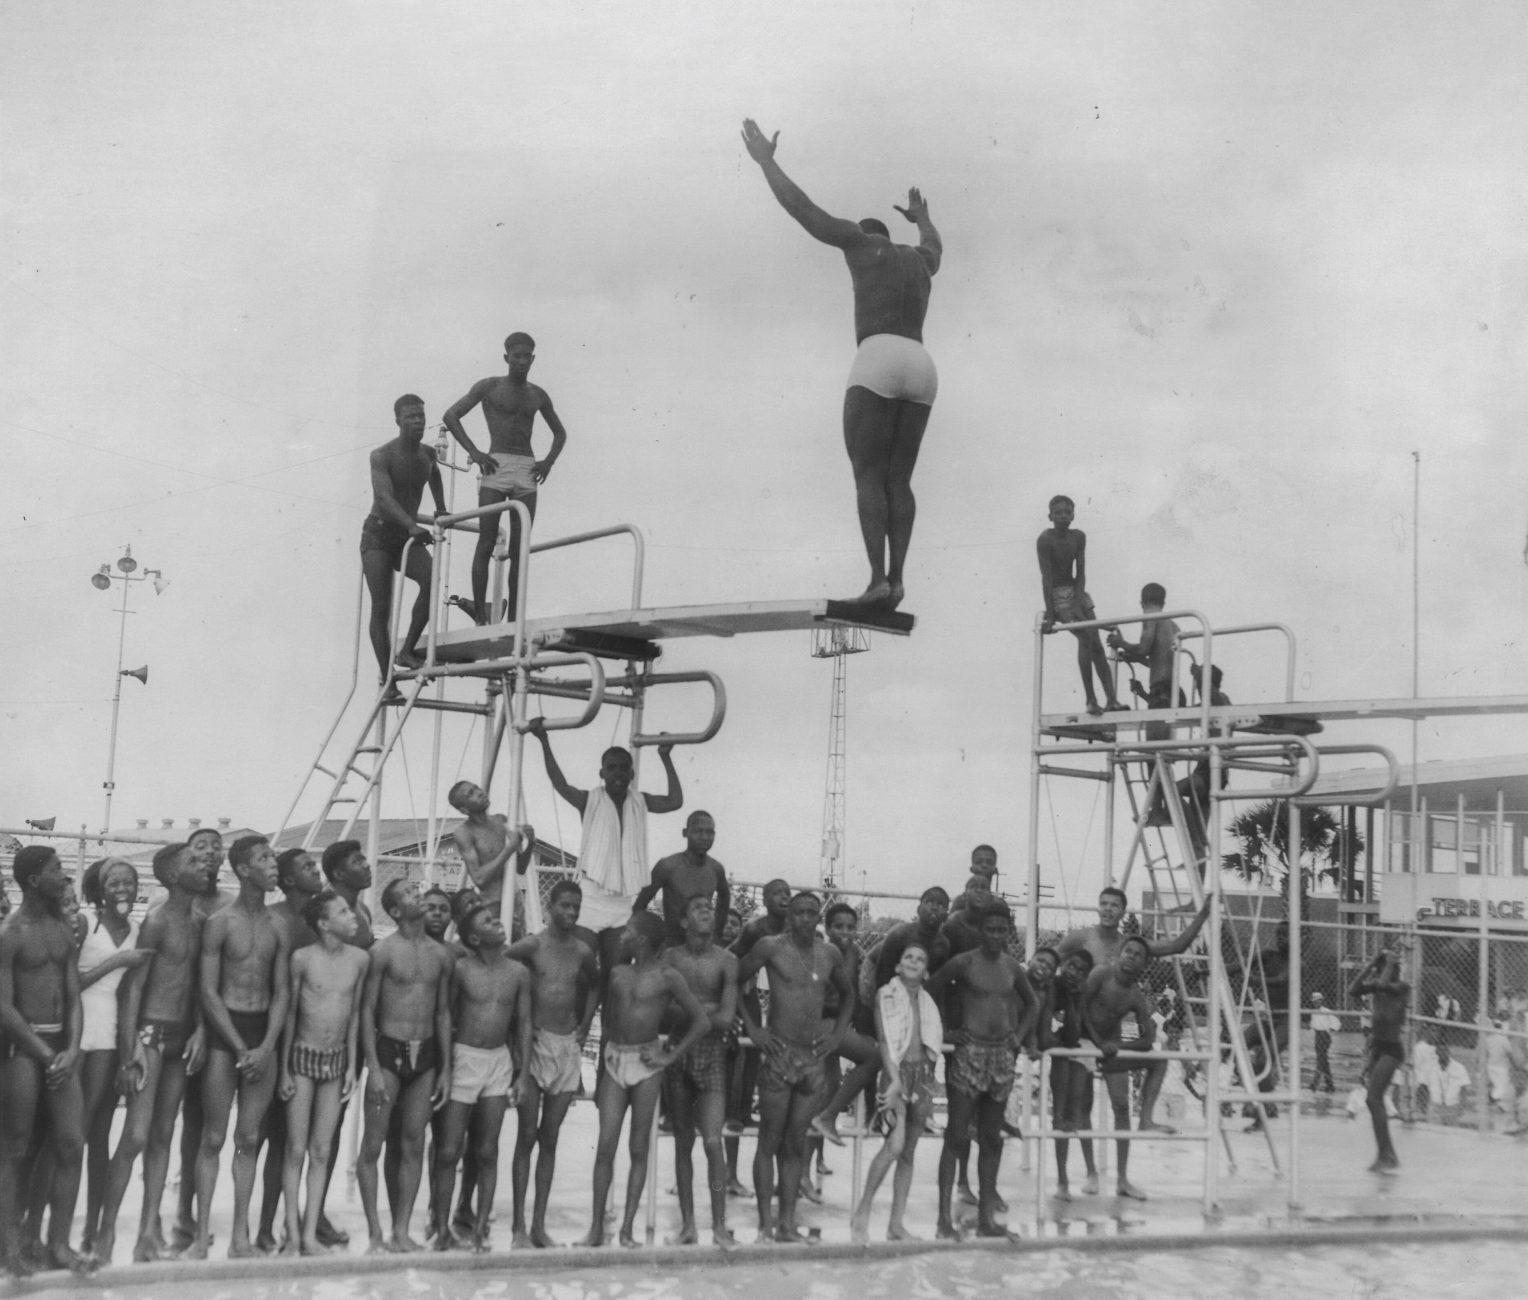 black and white photograph of residents gathered around diving board on beach front